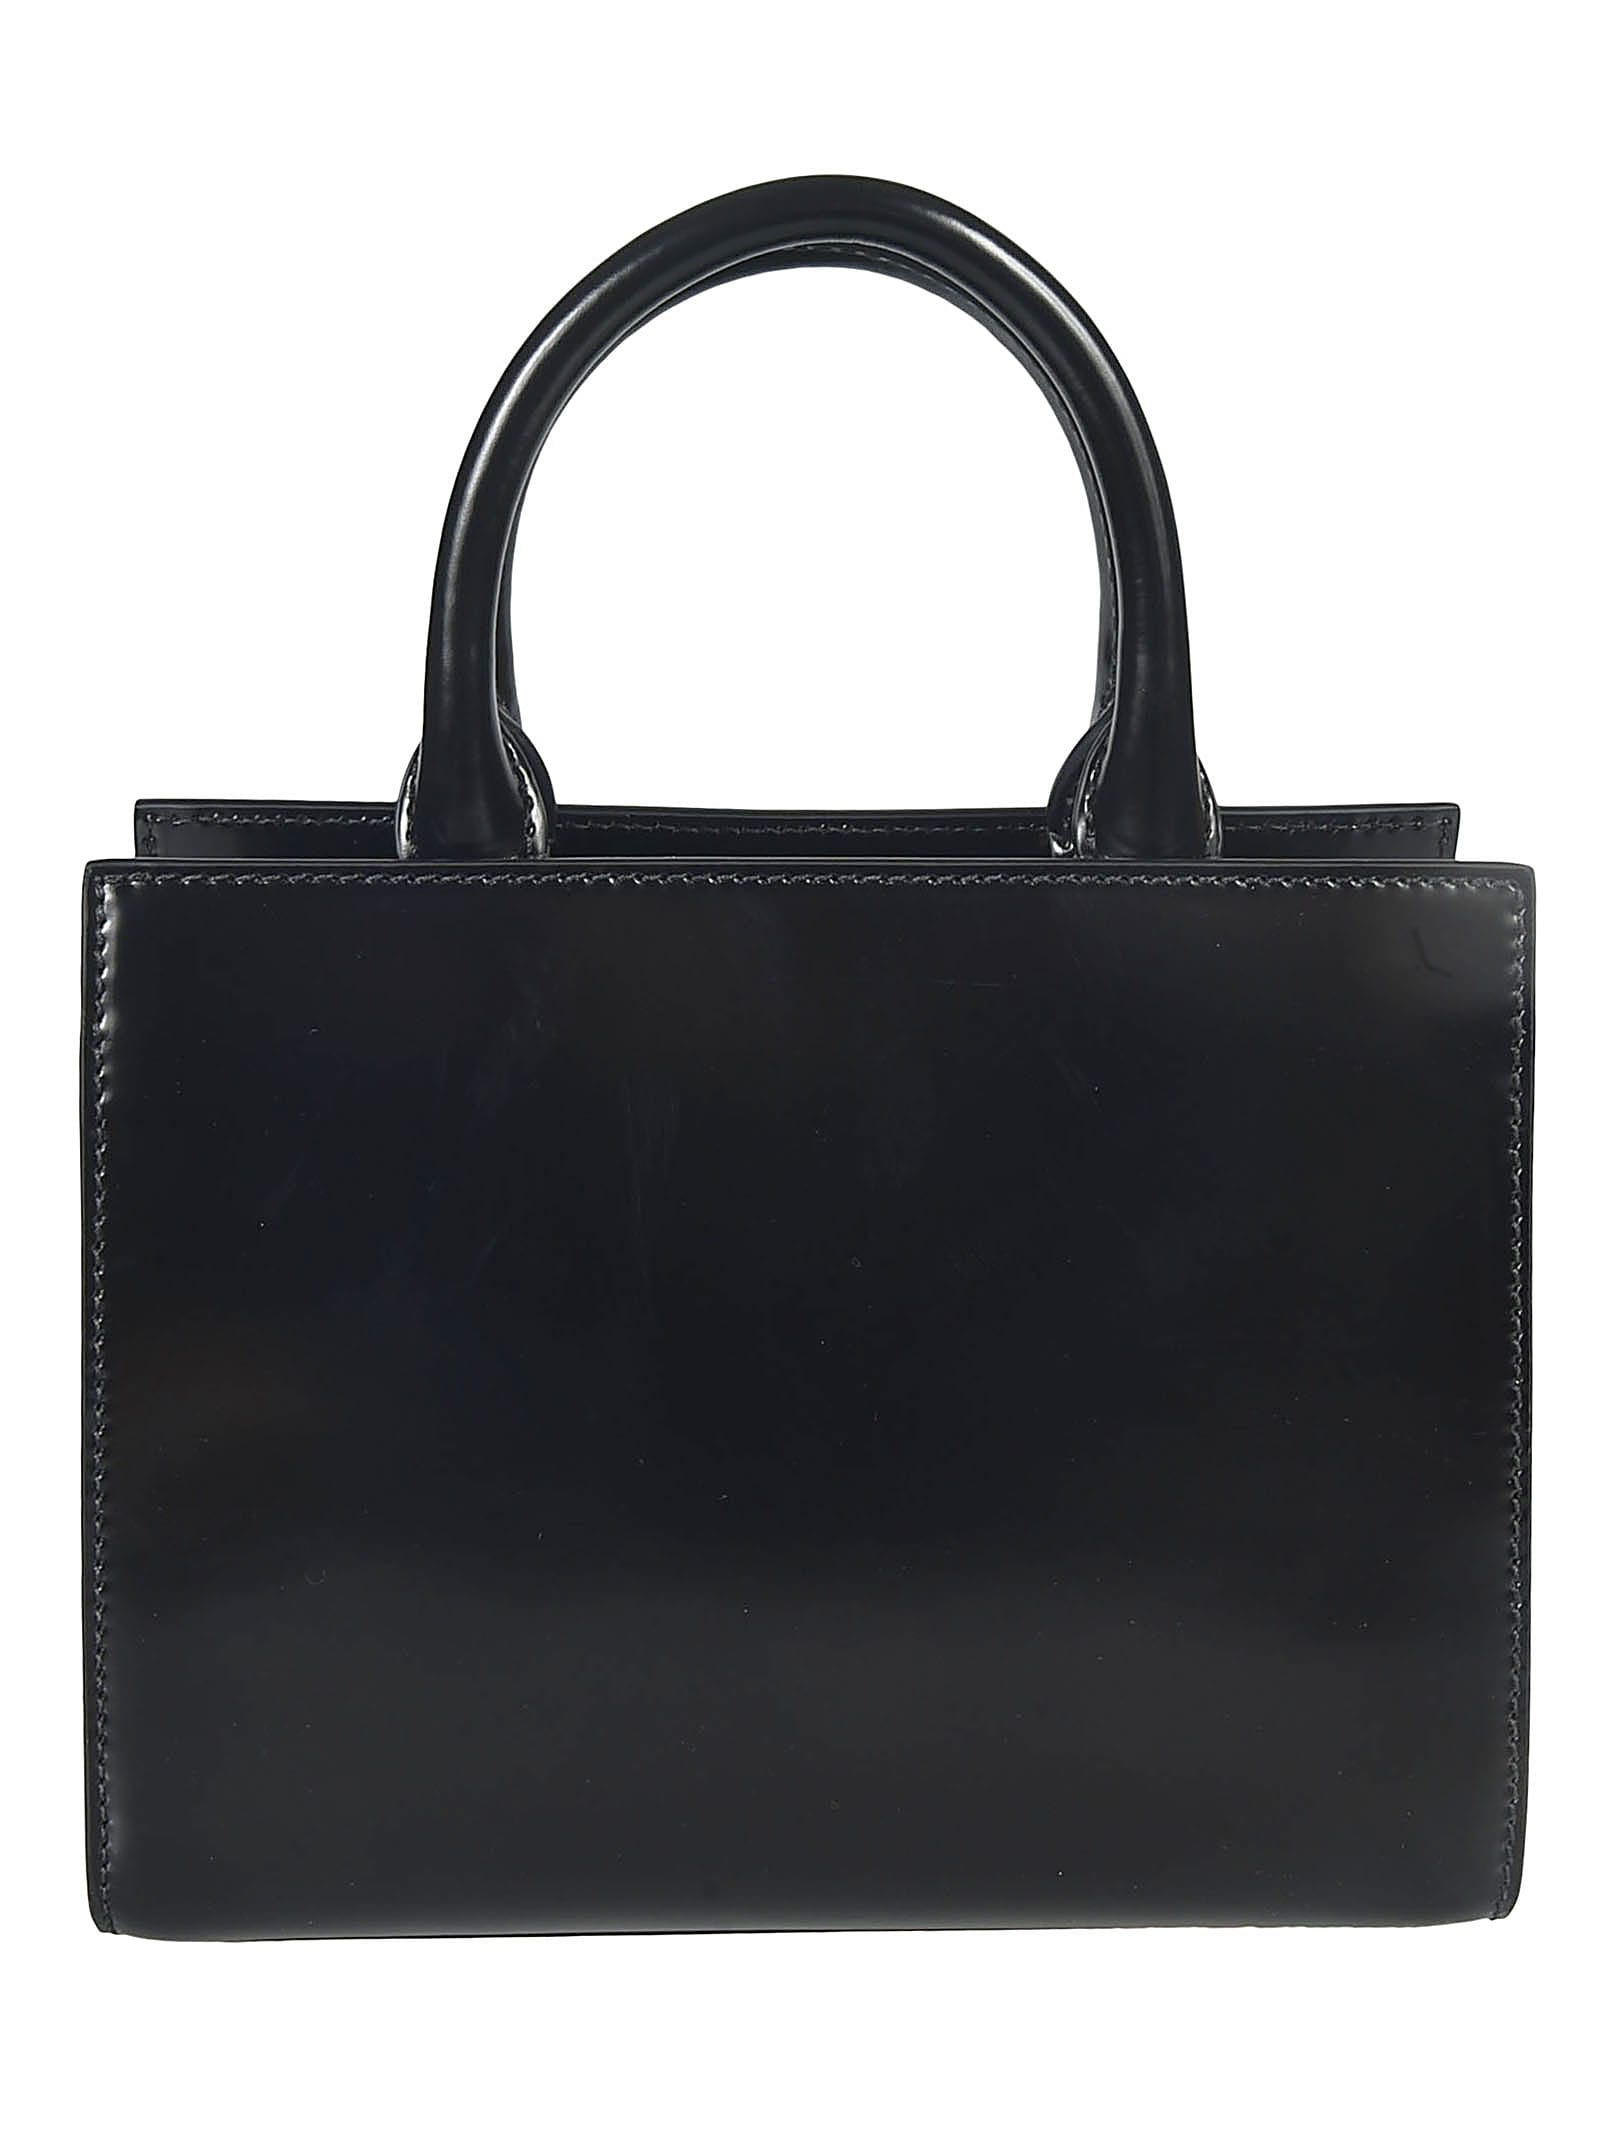 Shop Bally Palace Tote In Black/gold